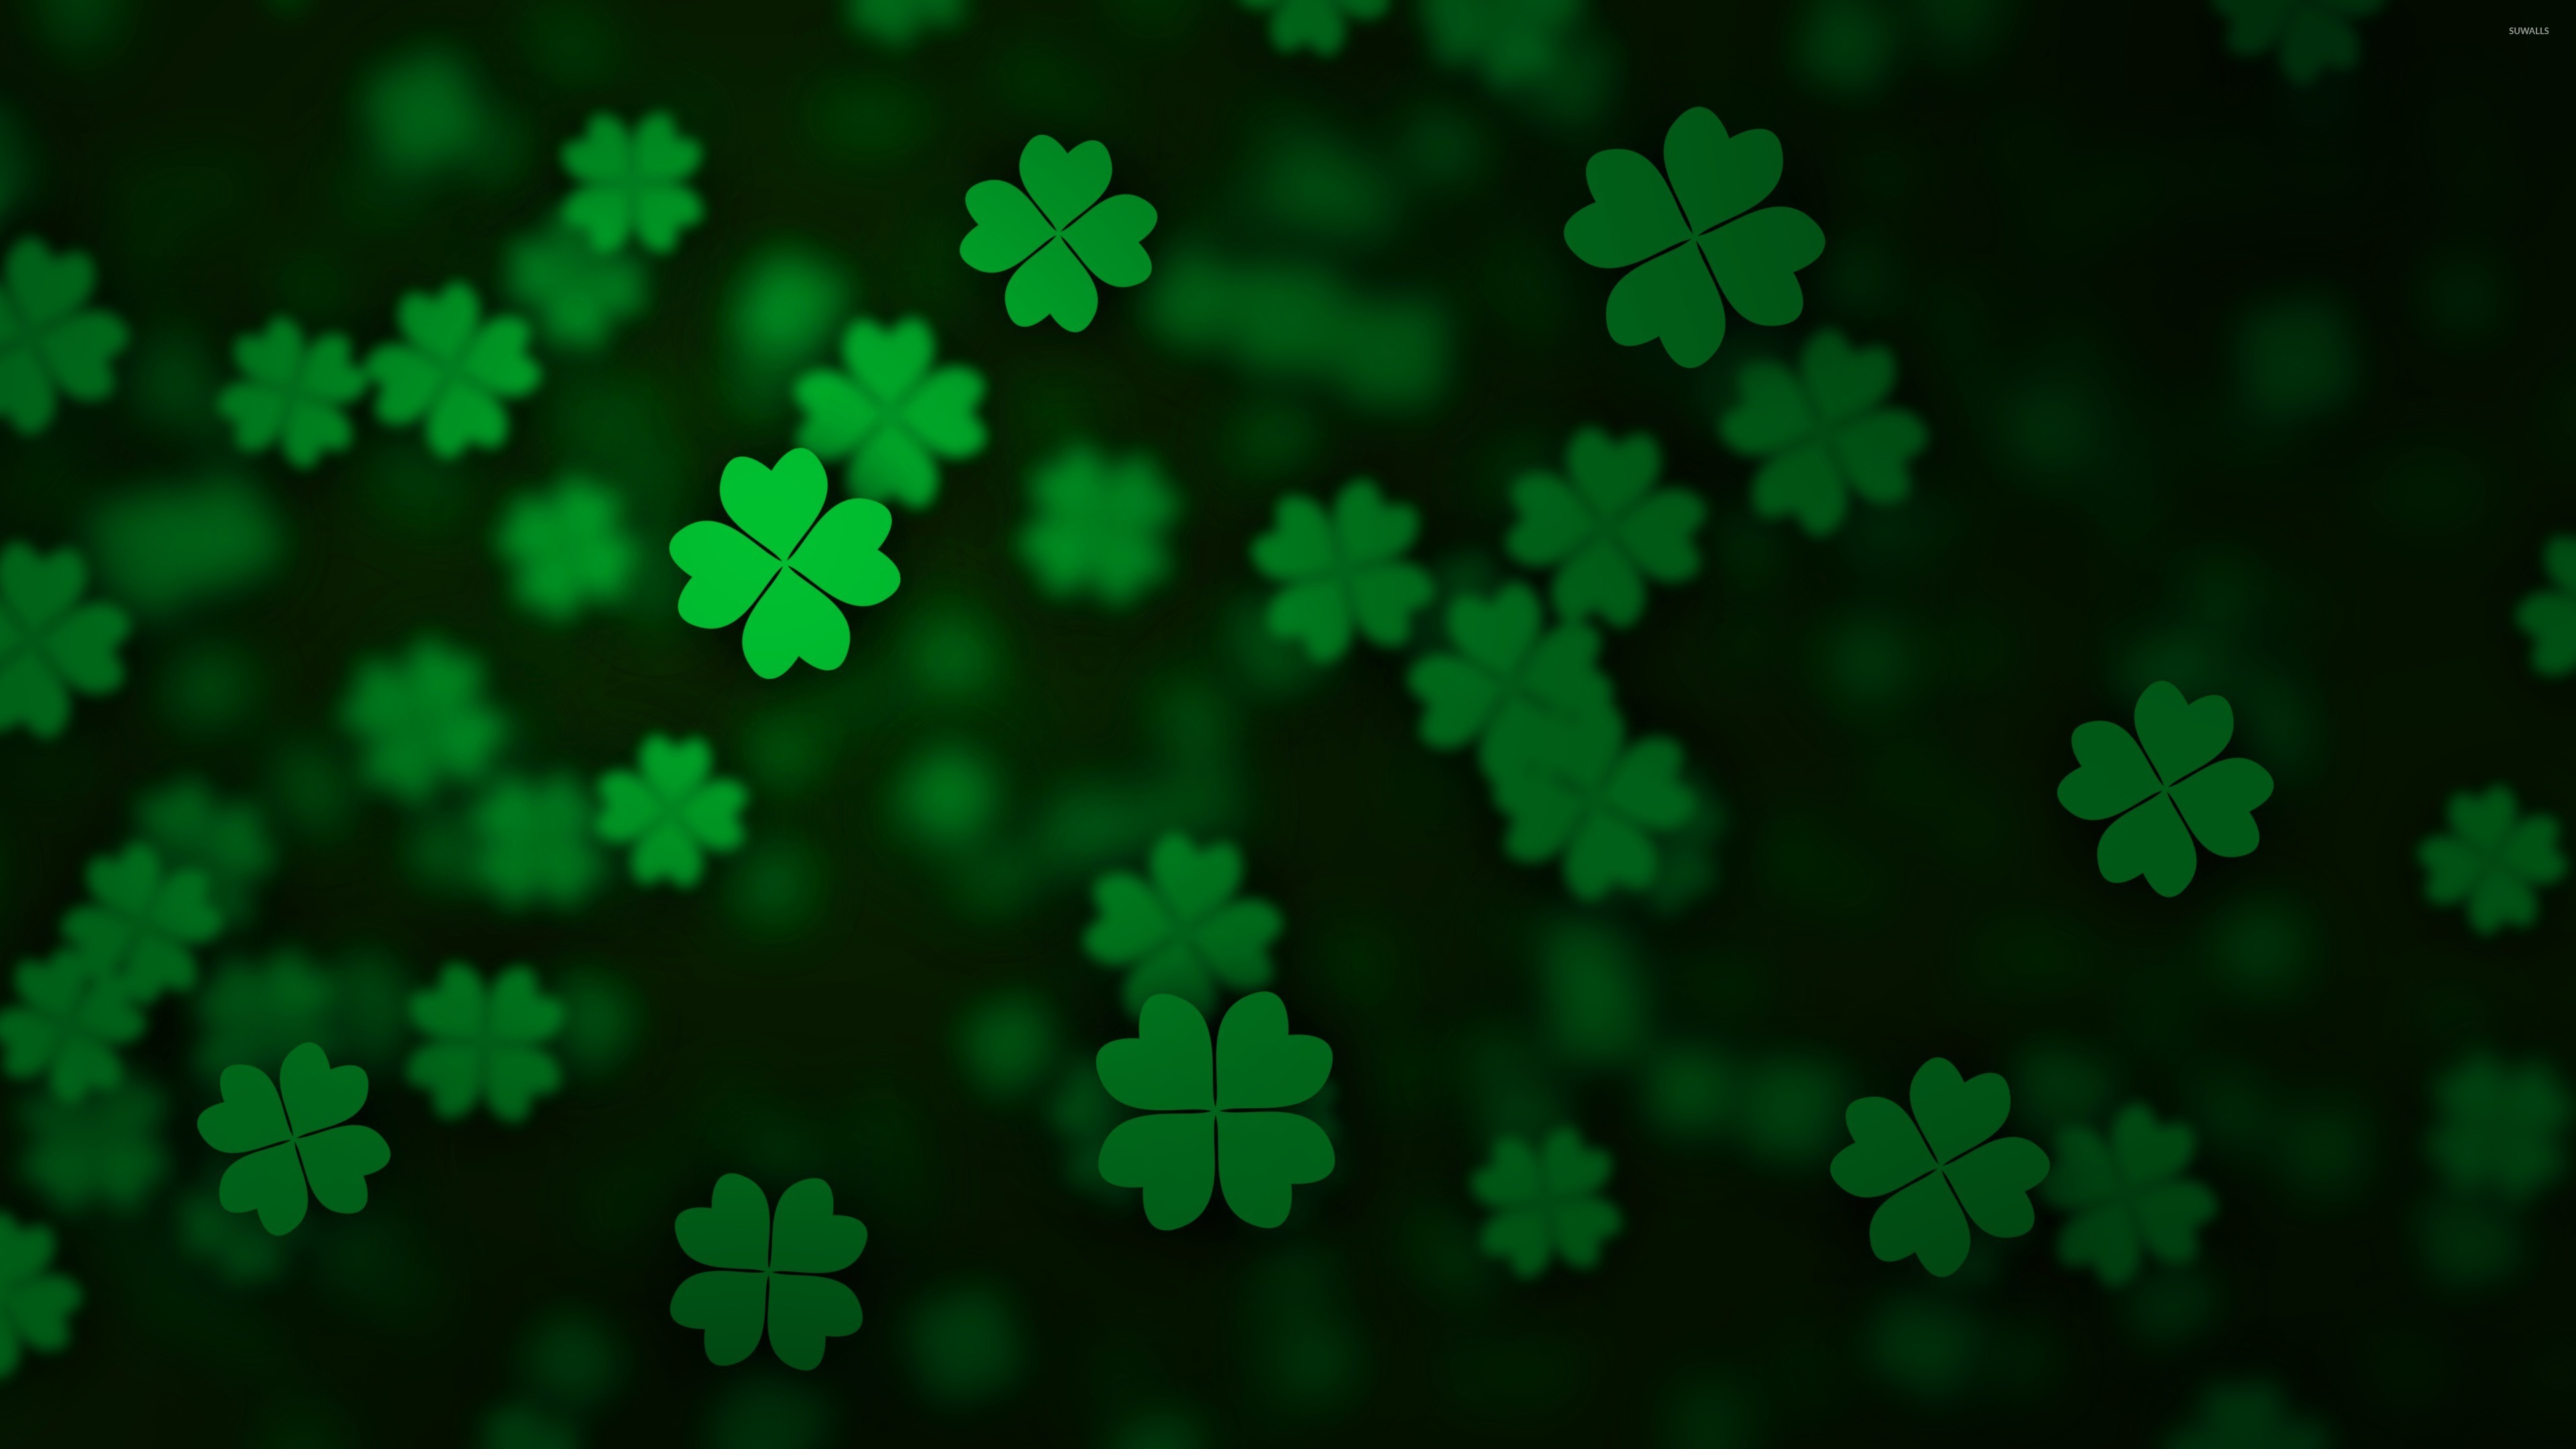 Floating Clovers Wallpaper Holiday Wallpapers 52888 HD Wallpapers Download Free Map Images Wallpaper [wallpaper684.blogspot.com]